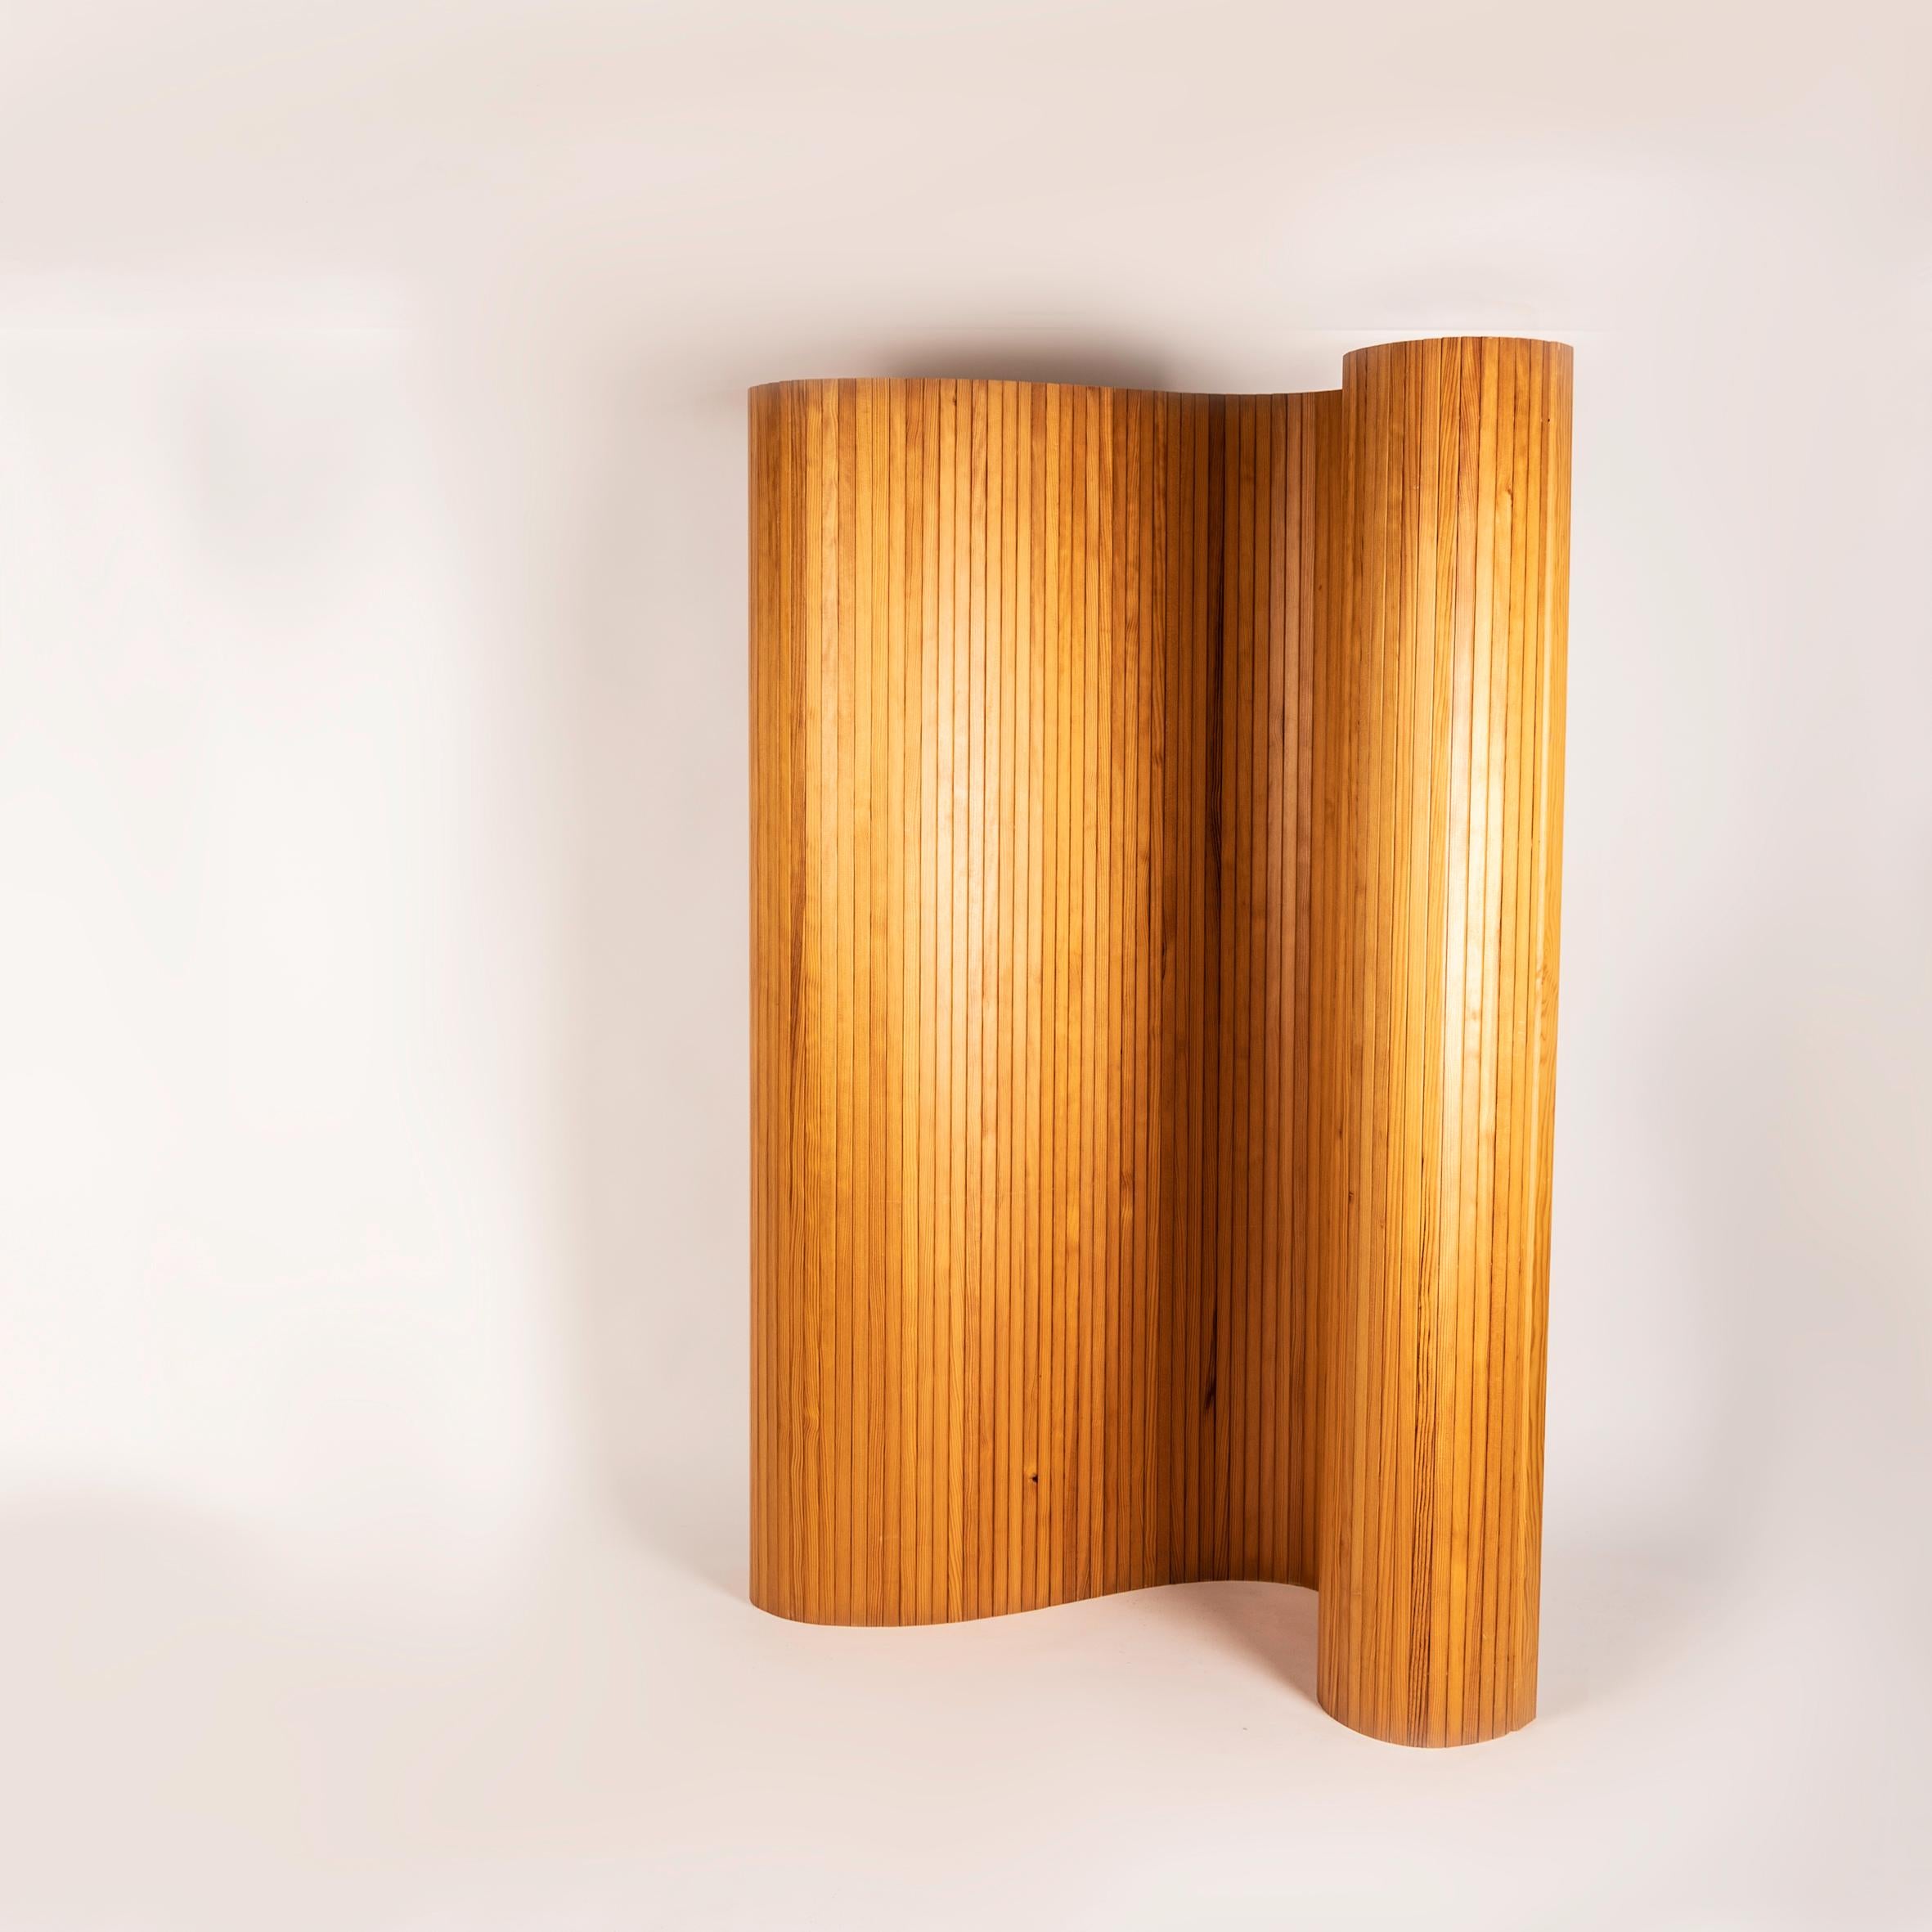 Bauhaus A Mid-century folding Screen in the style of Alvar Aalto  For Sale